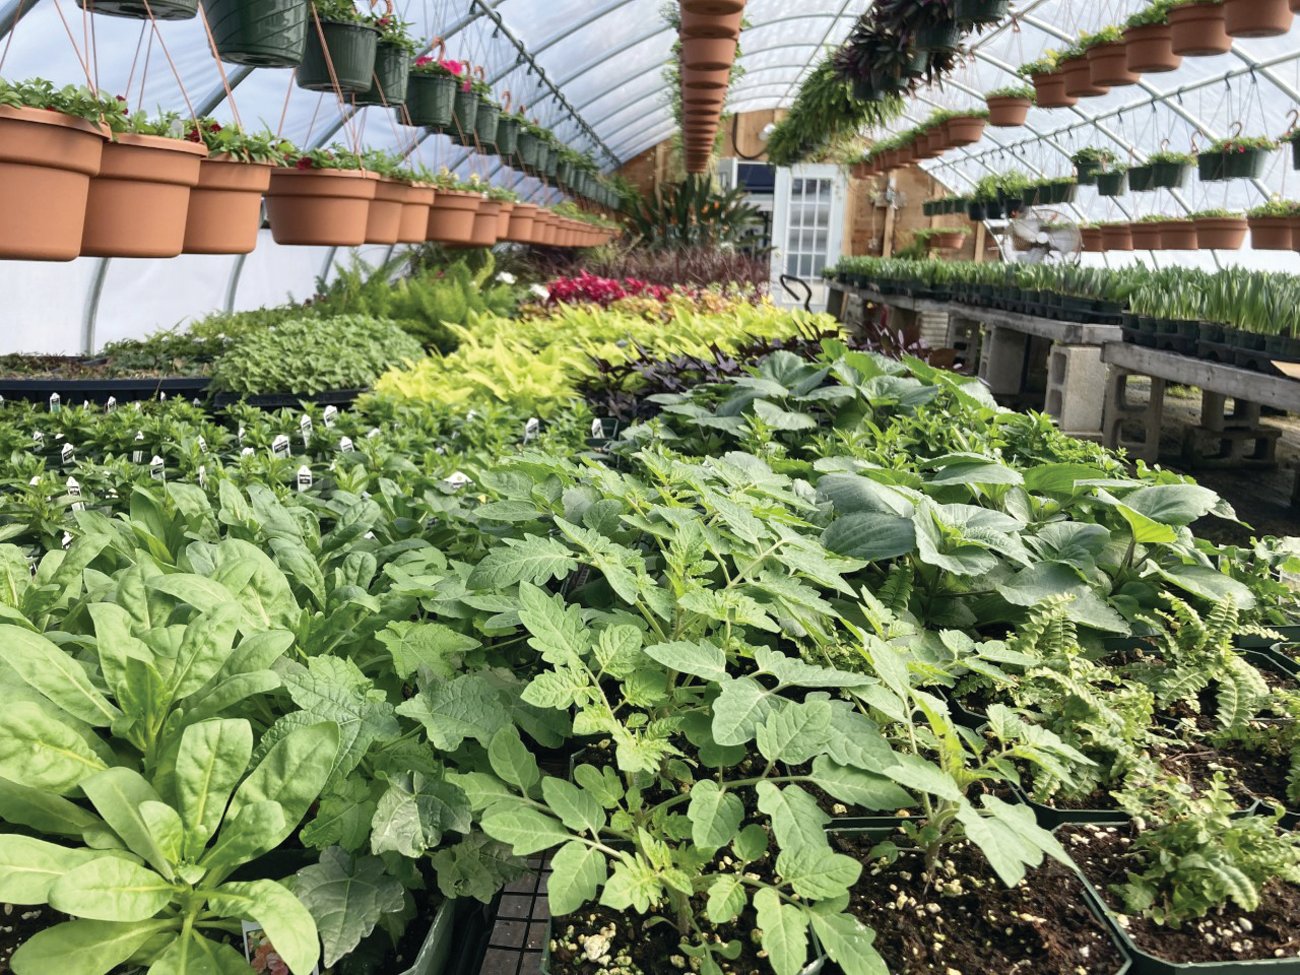 PACKED WITH PLANTS: Yard Works Inc.’s greenhouse is filled with household plants that can help purify the air in your home.